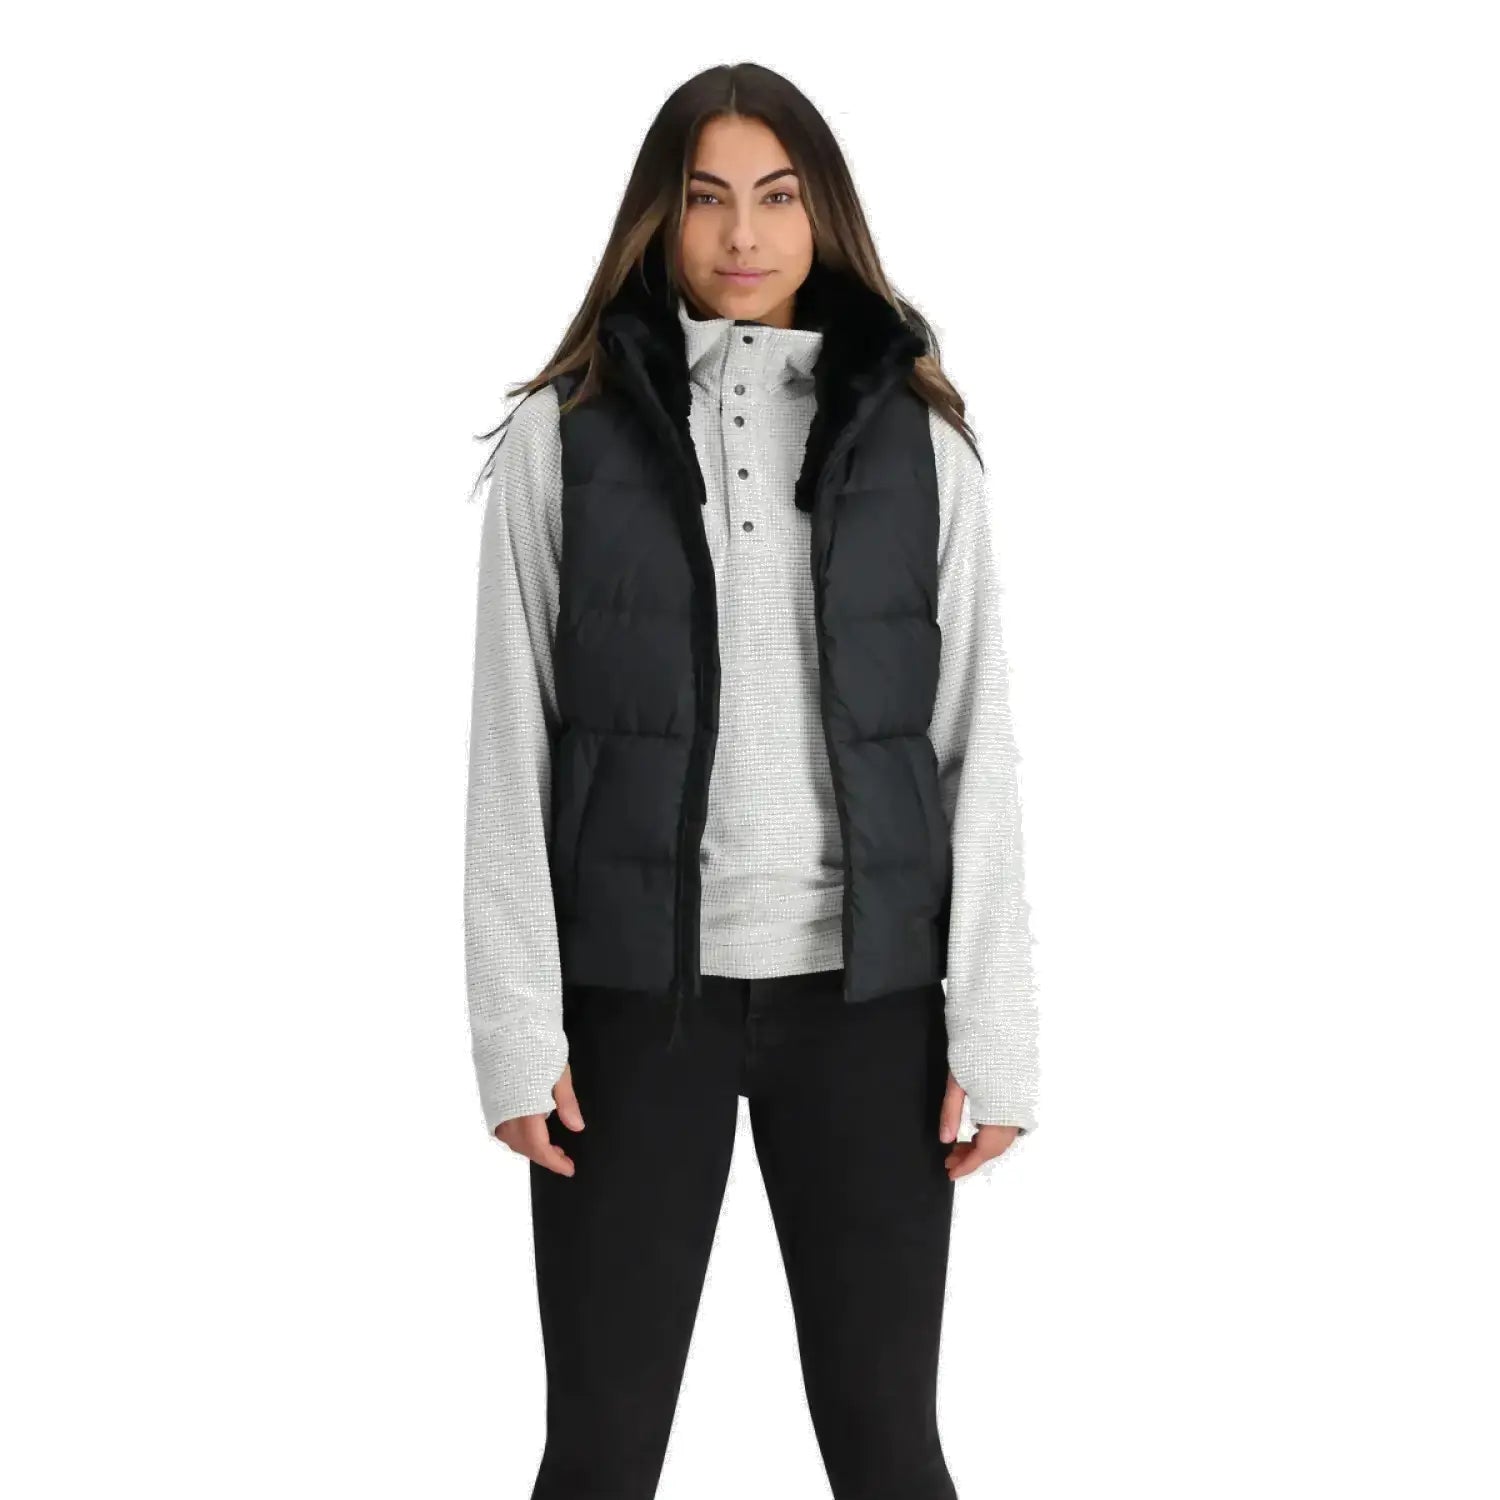 Outdoor Research Women's Coldfront Hooded Down Vest II shown in the Black color option. Front view, open on a model.